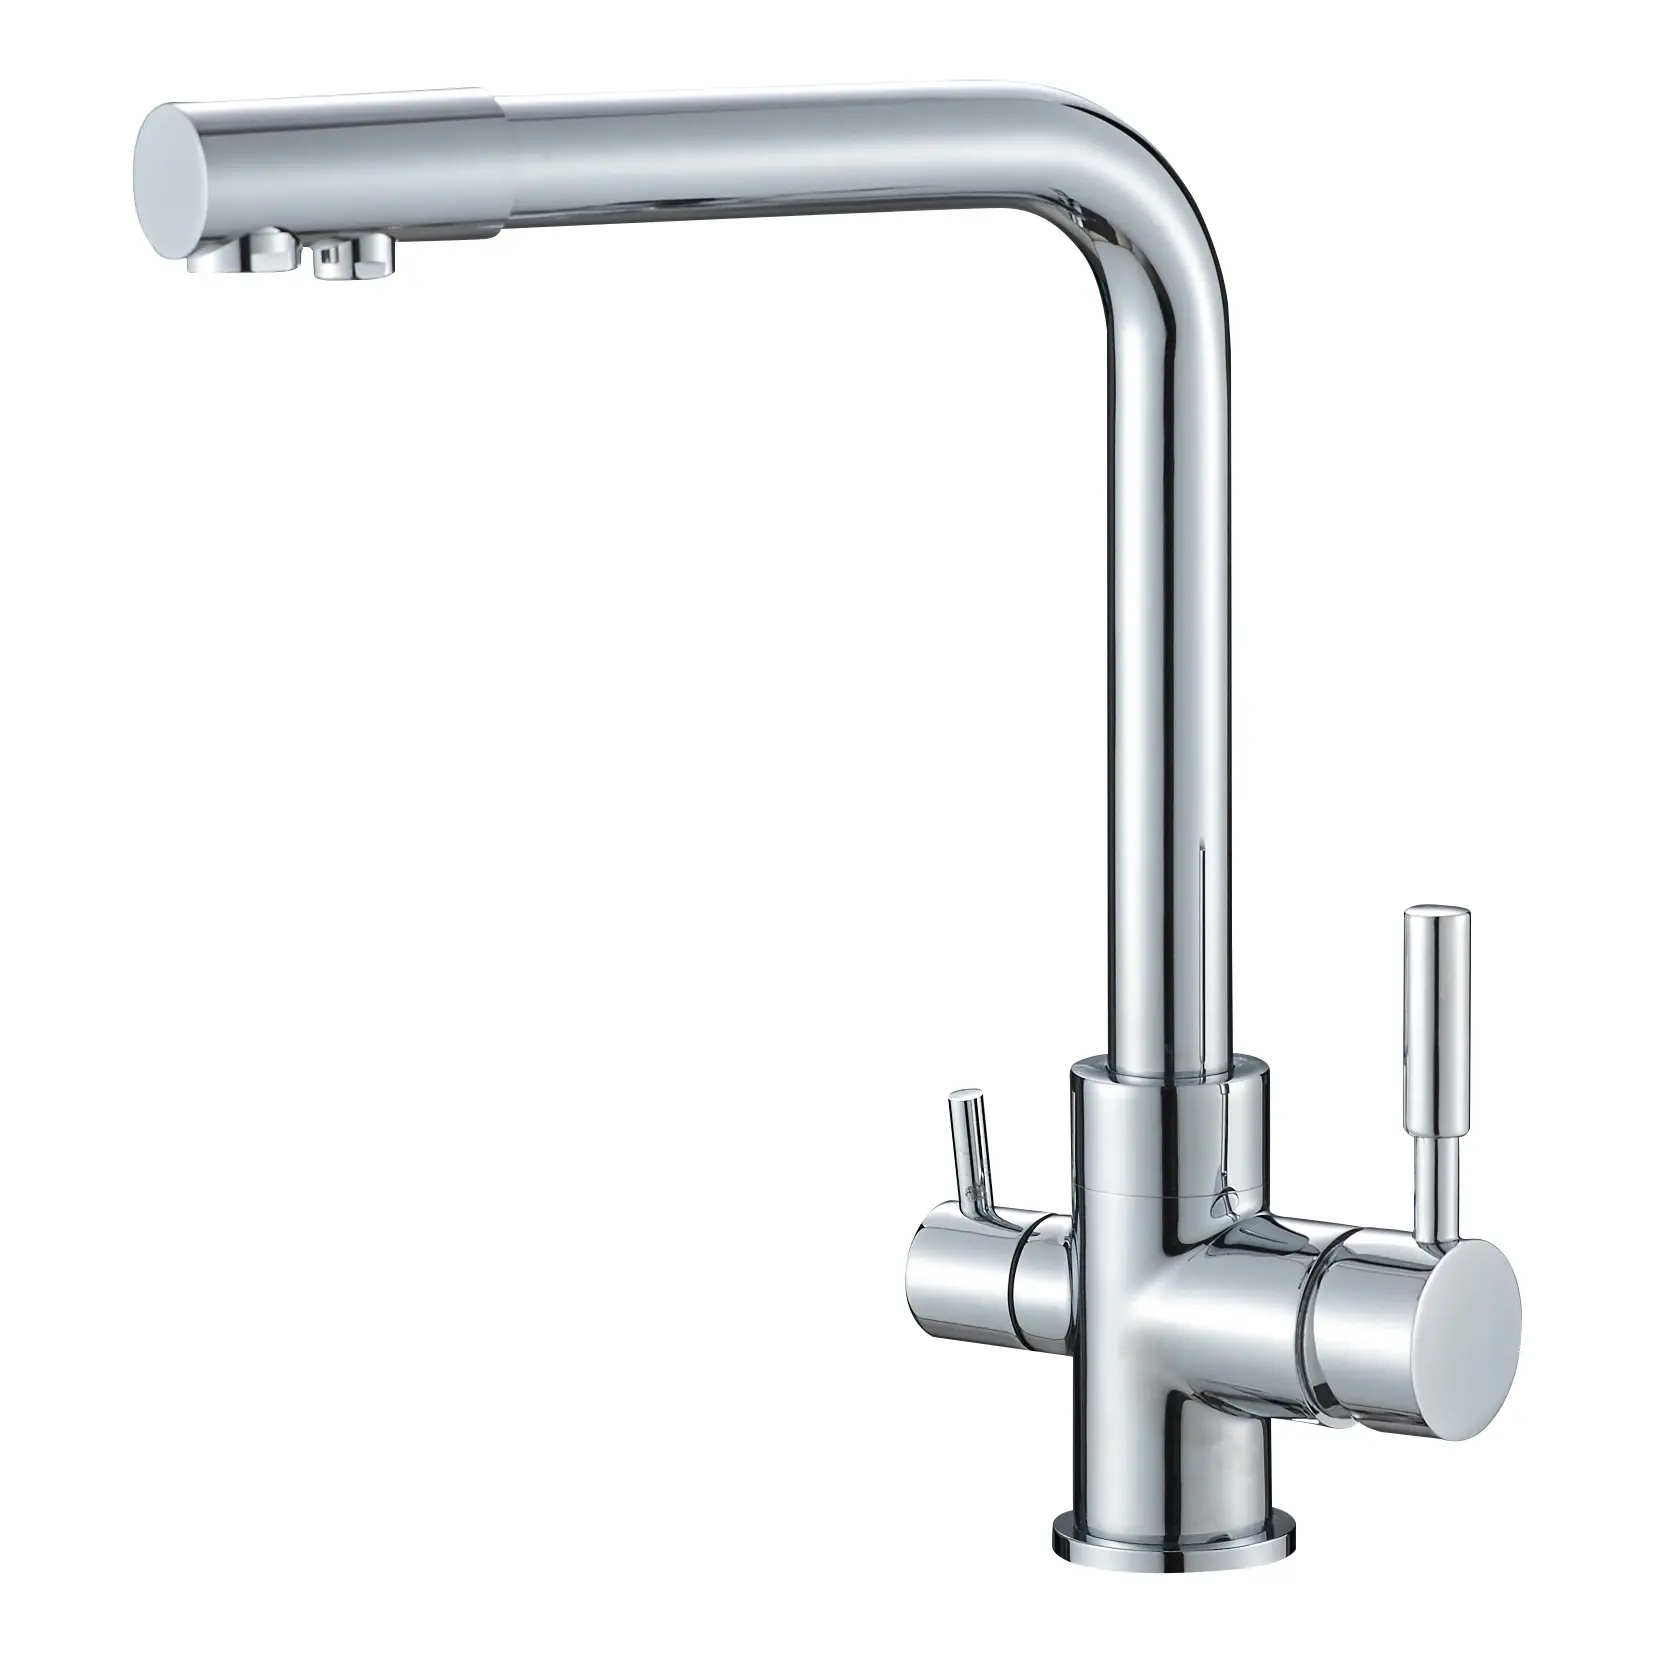 Iwater L shape pull out model instant chilled water faucet